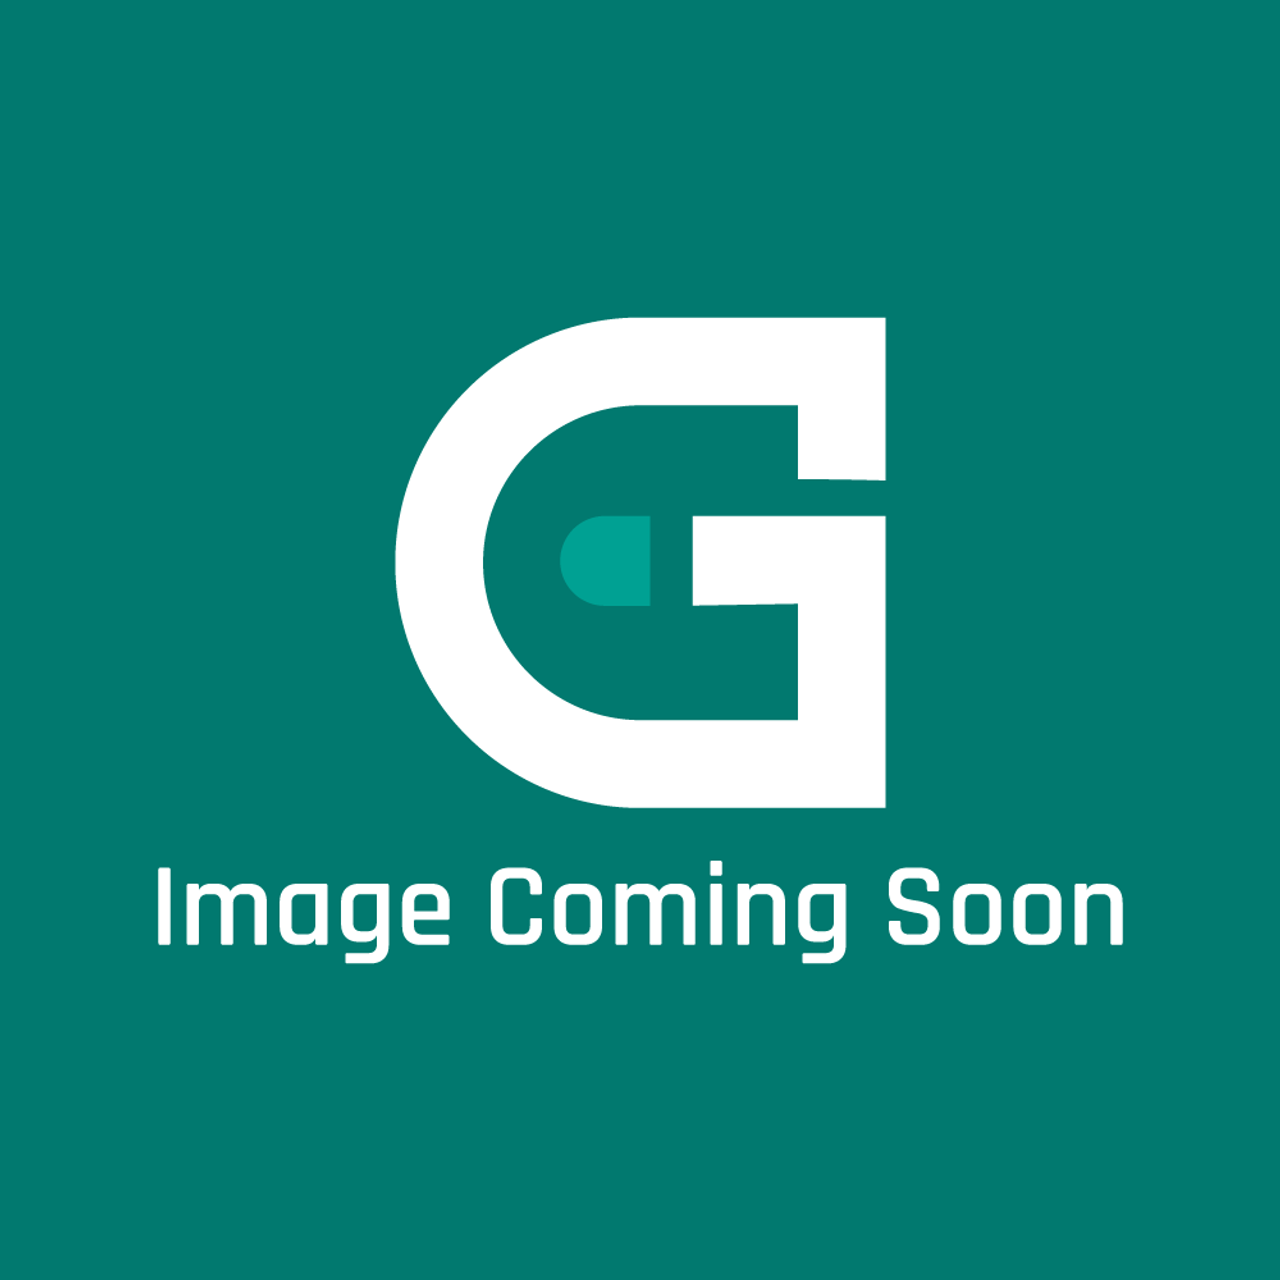 Frigidaire - Electrolux 137007800 Trim - Image Coming Soon!